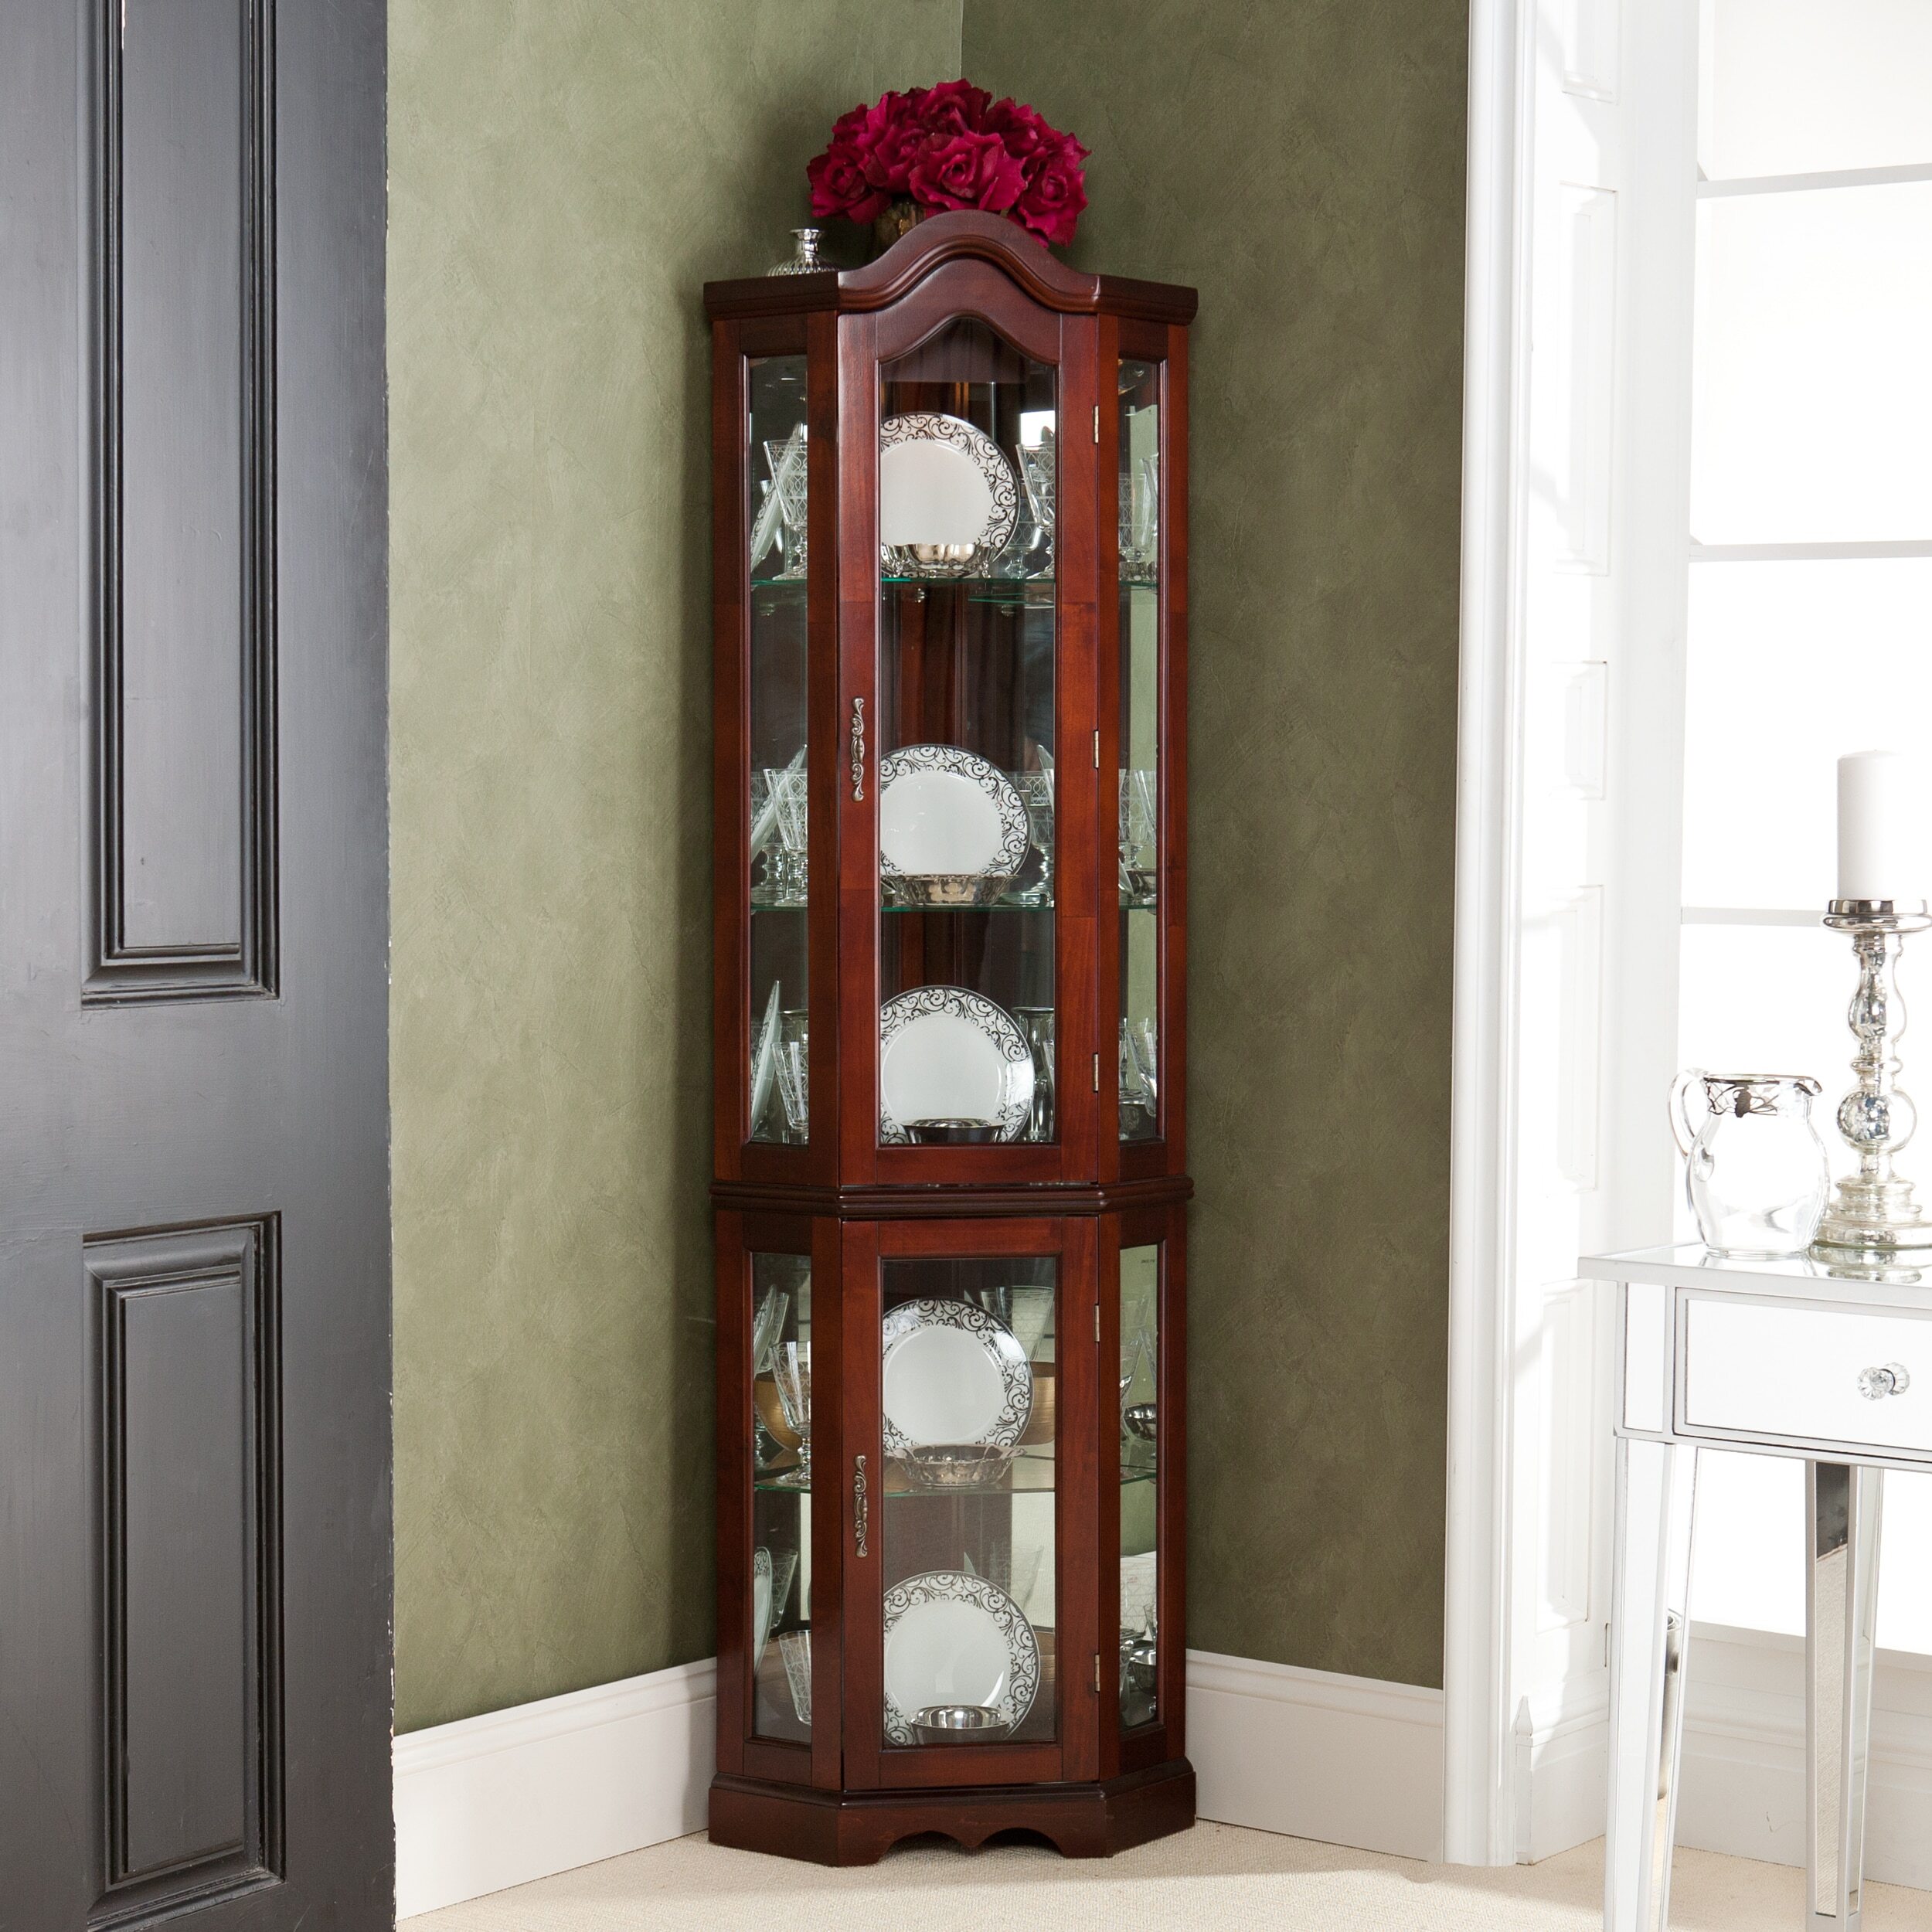 A traditional dark wood dining room corner cabinet 